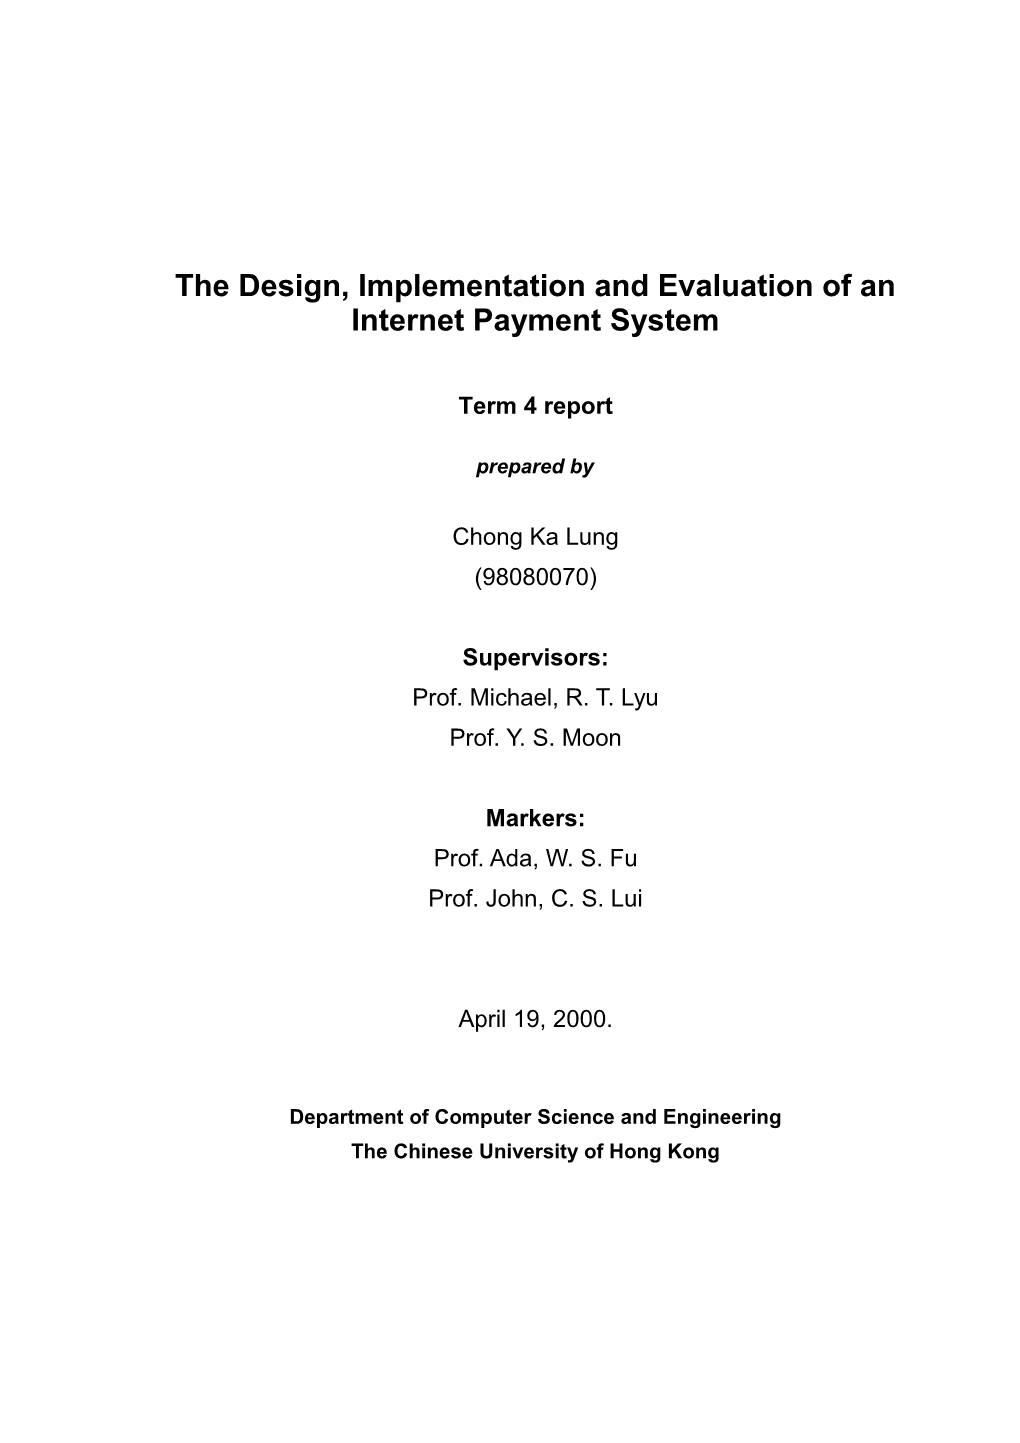 The Design, Implementation and Evaluation of an Internet Payment System